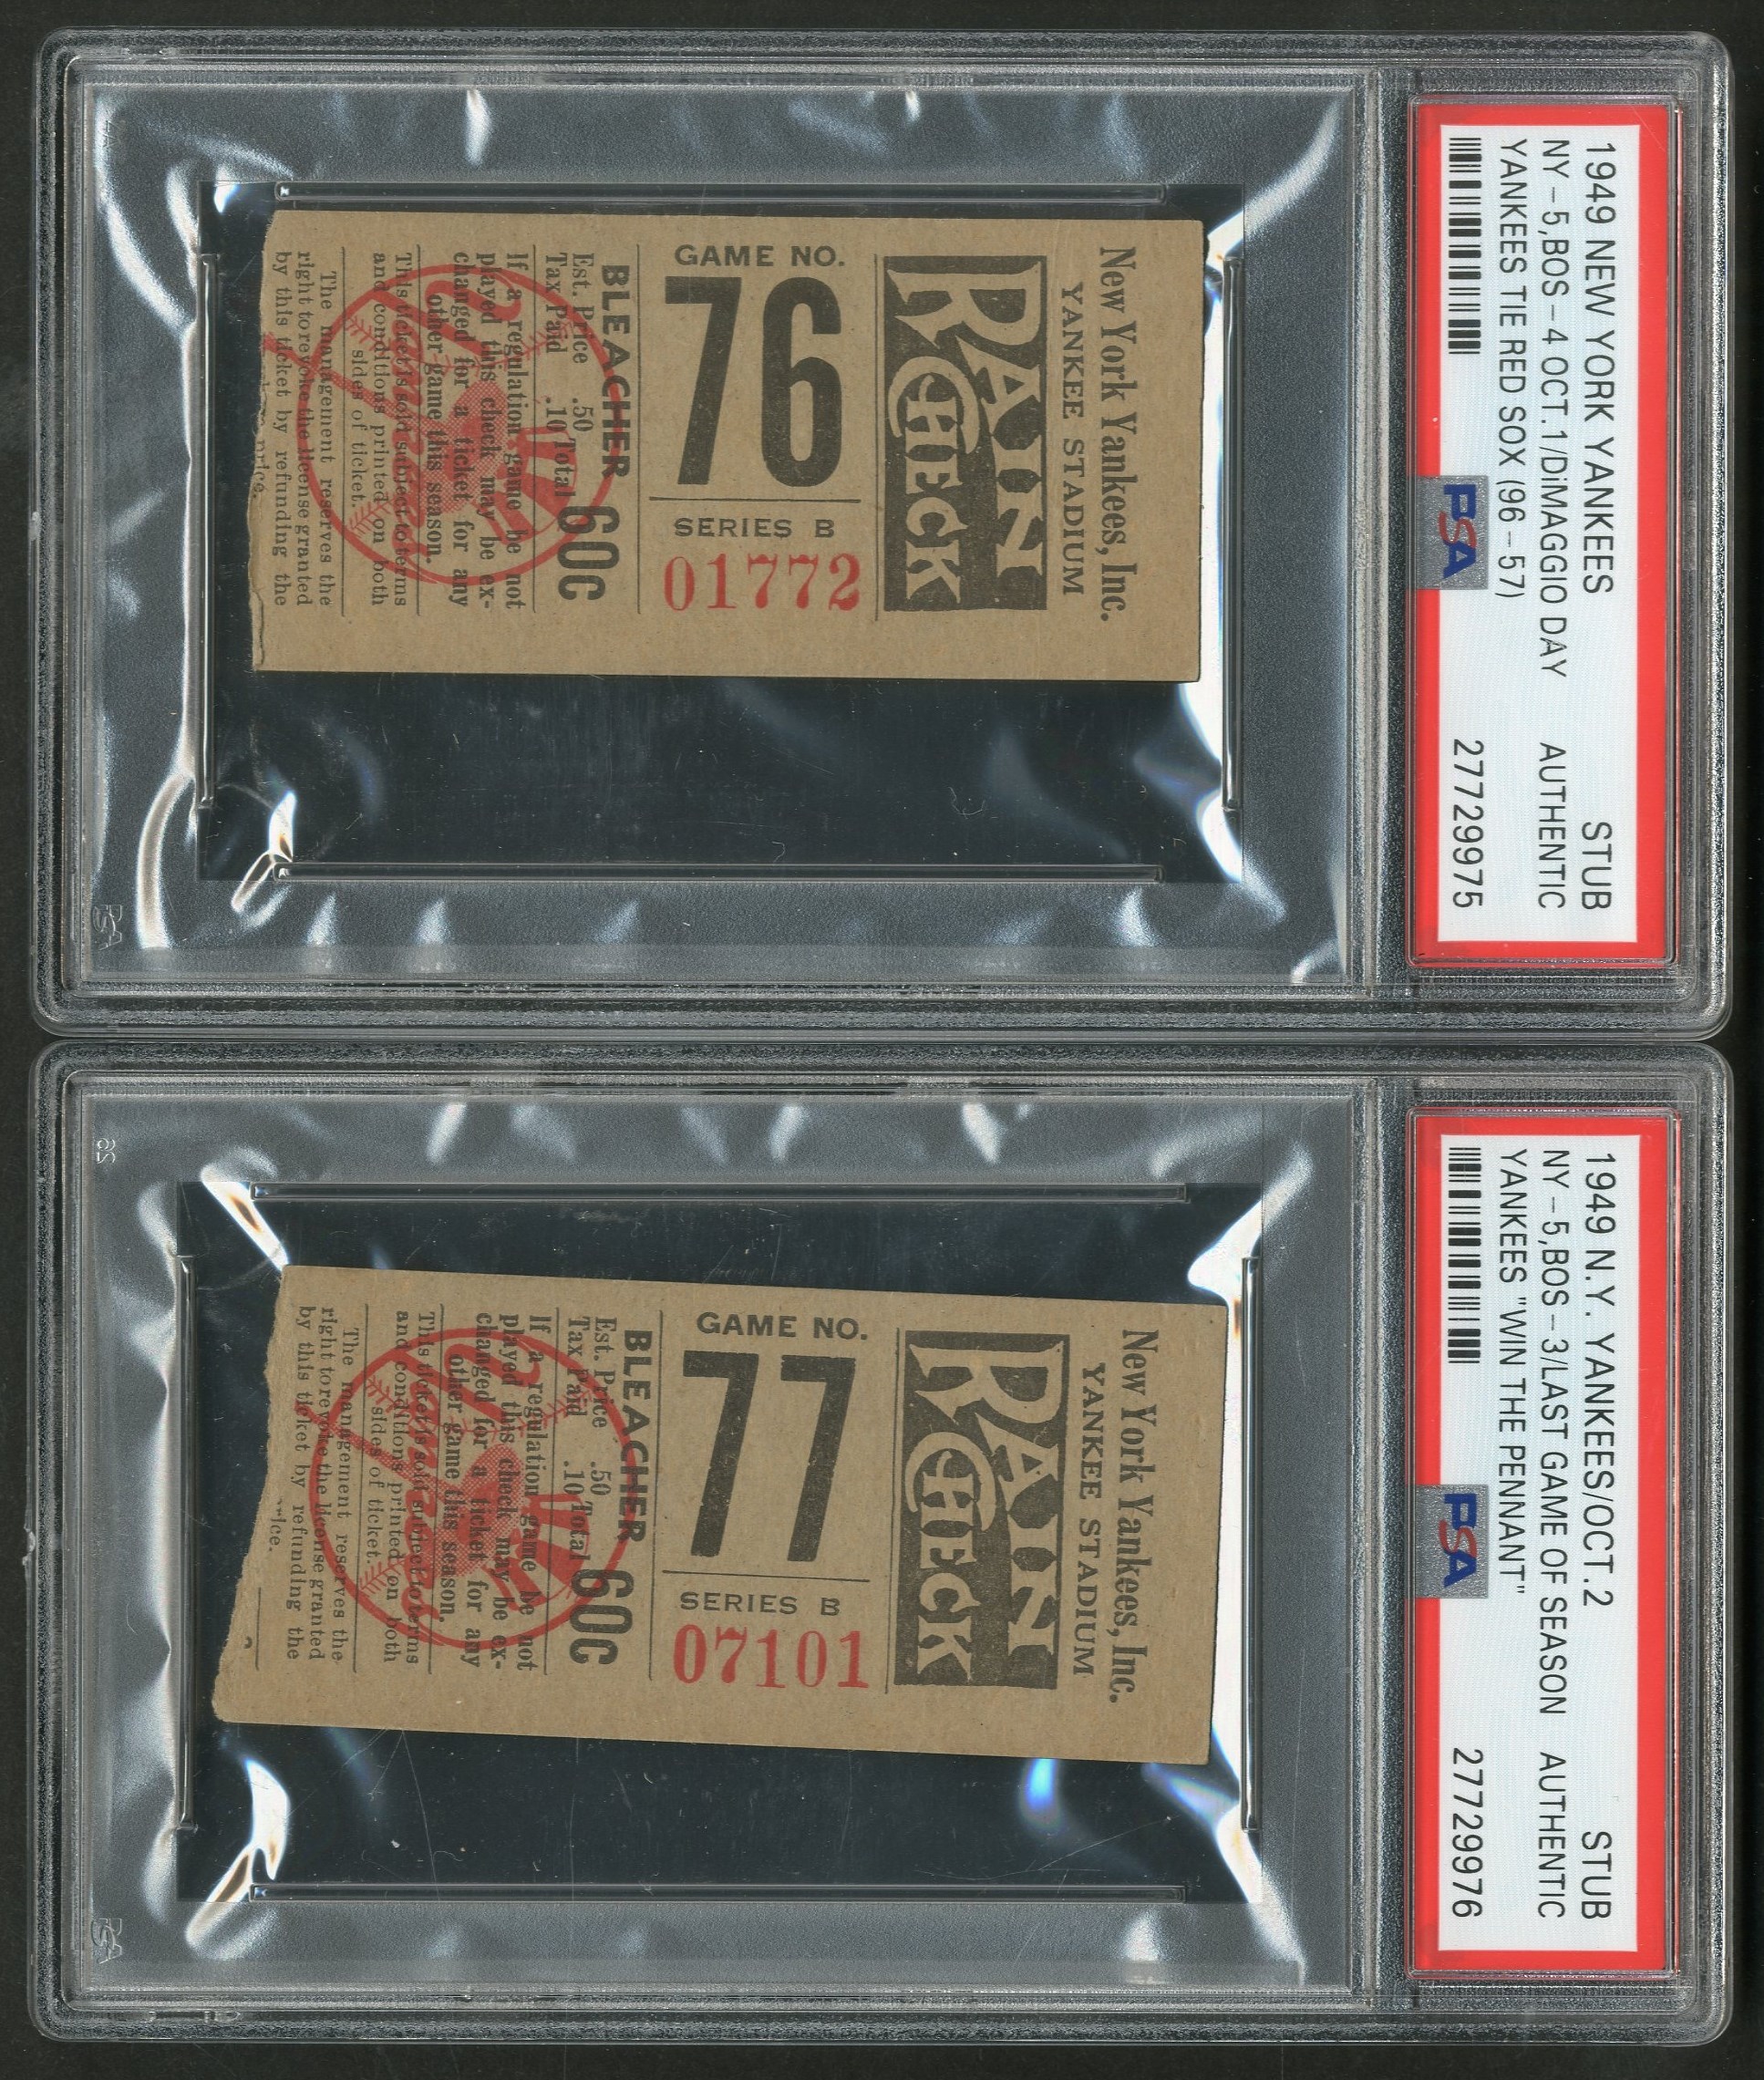 Important 1949 New York Yankees Tie Red Sox & Yankees "Win the Pennant" Ticket Stubs - DiMaggio Day (PSA)